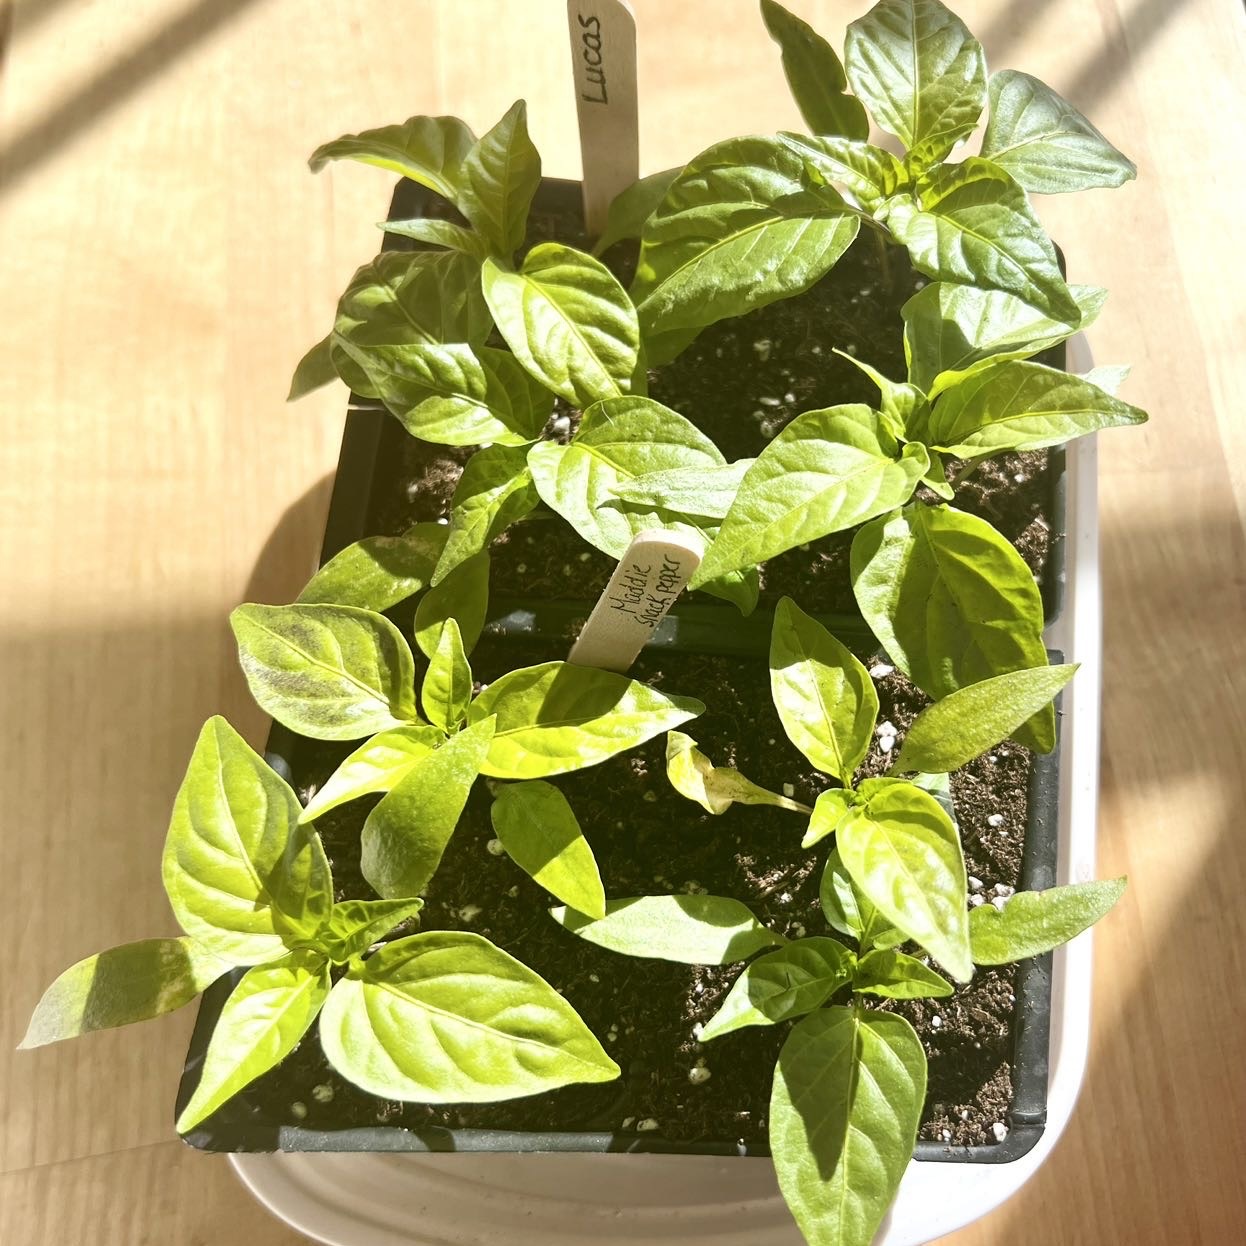 How to Grow Snack Peppers